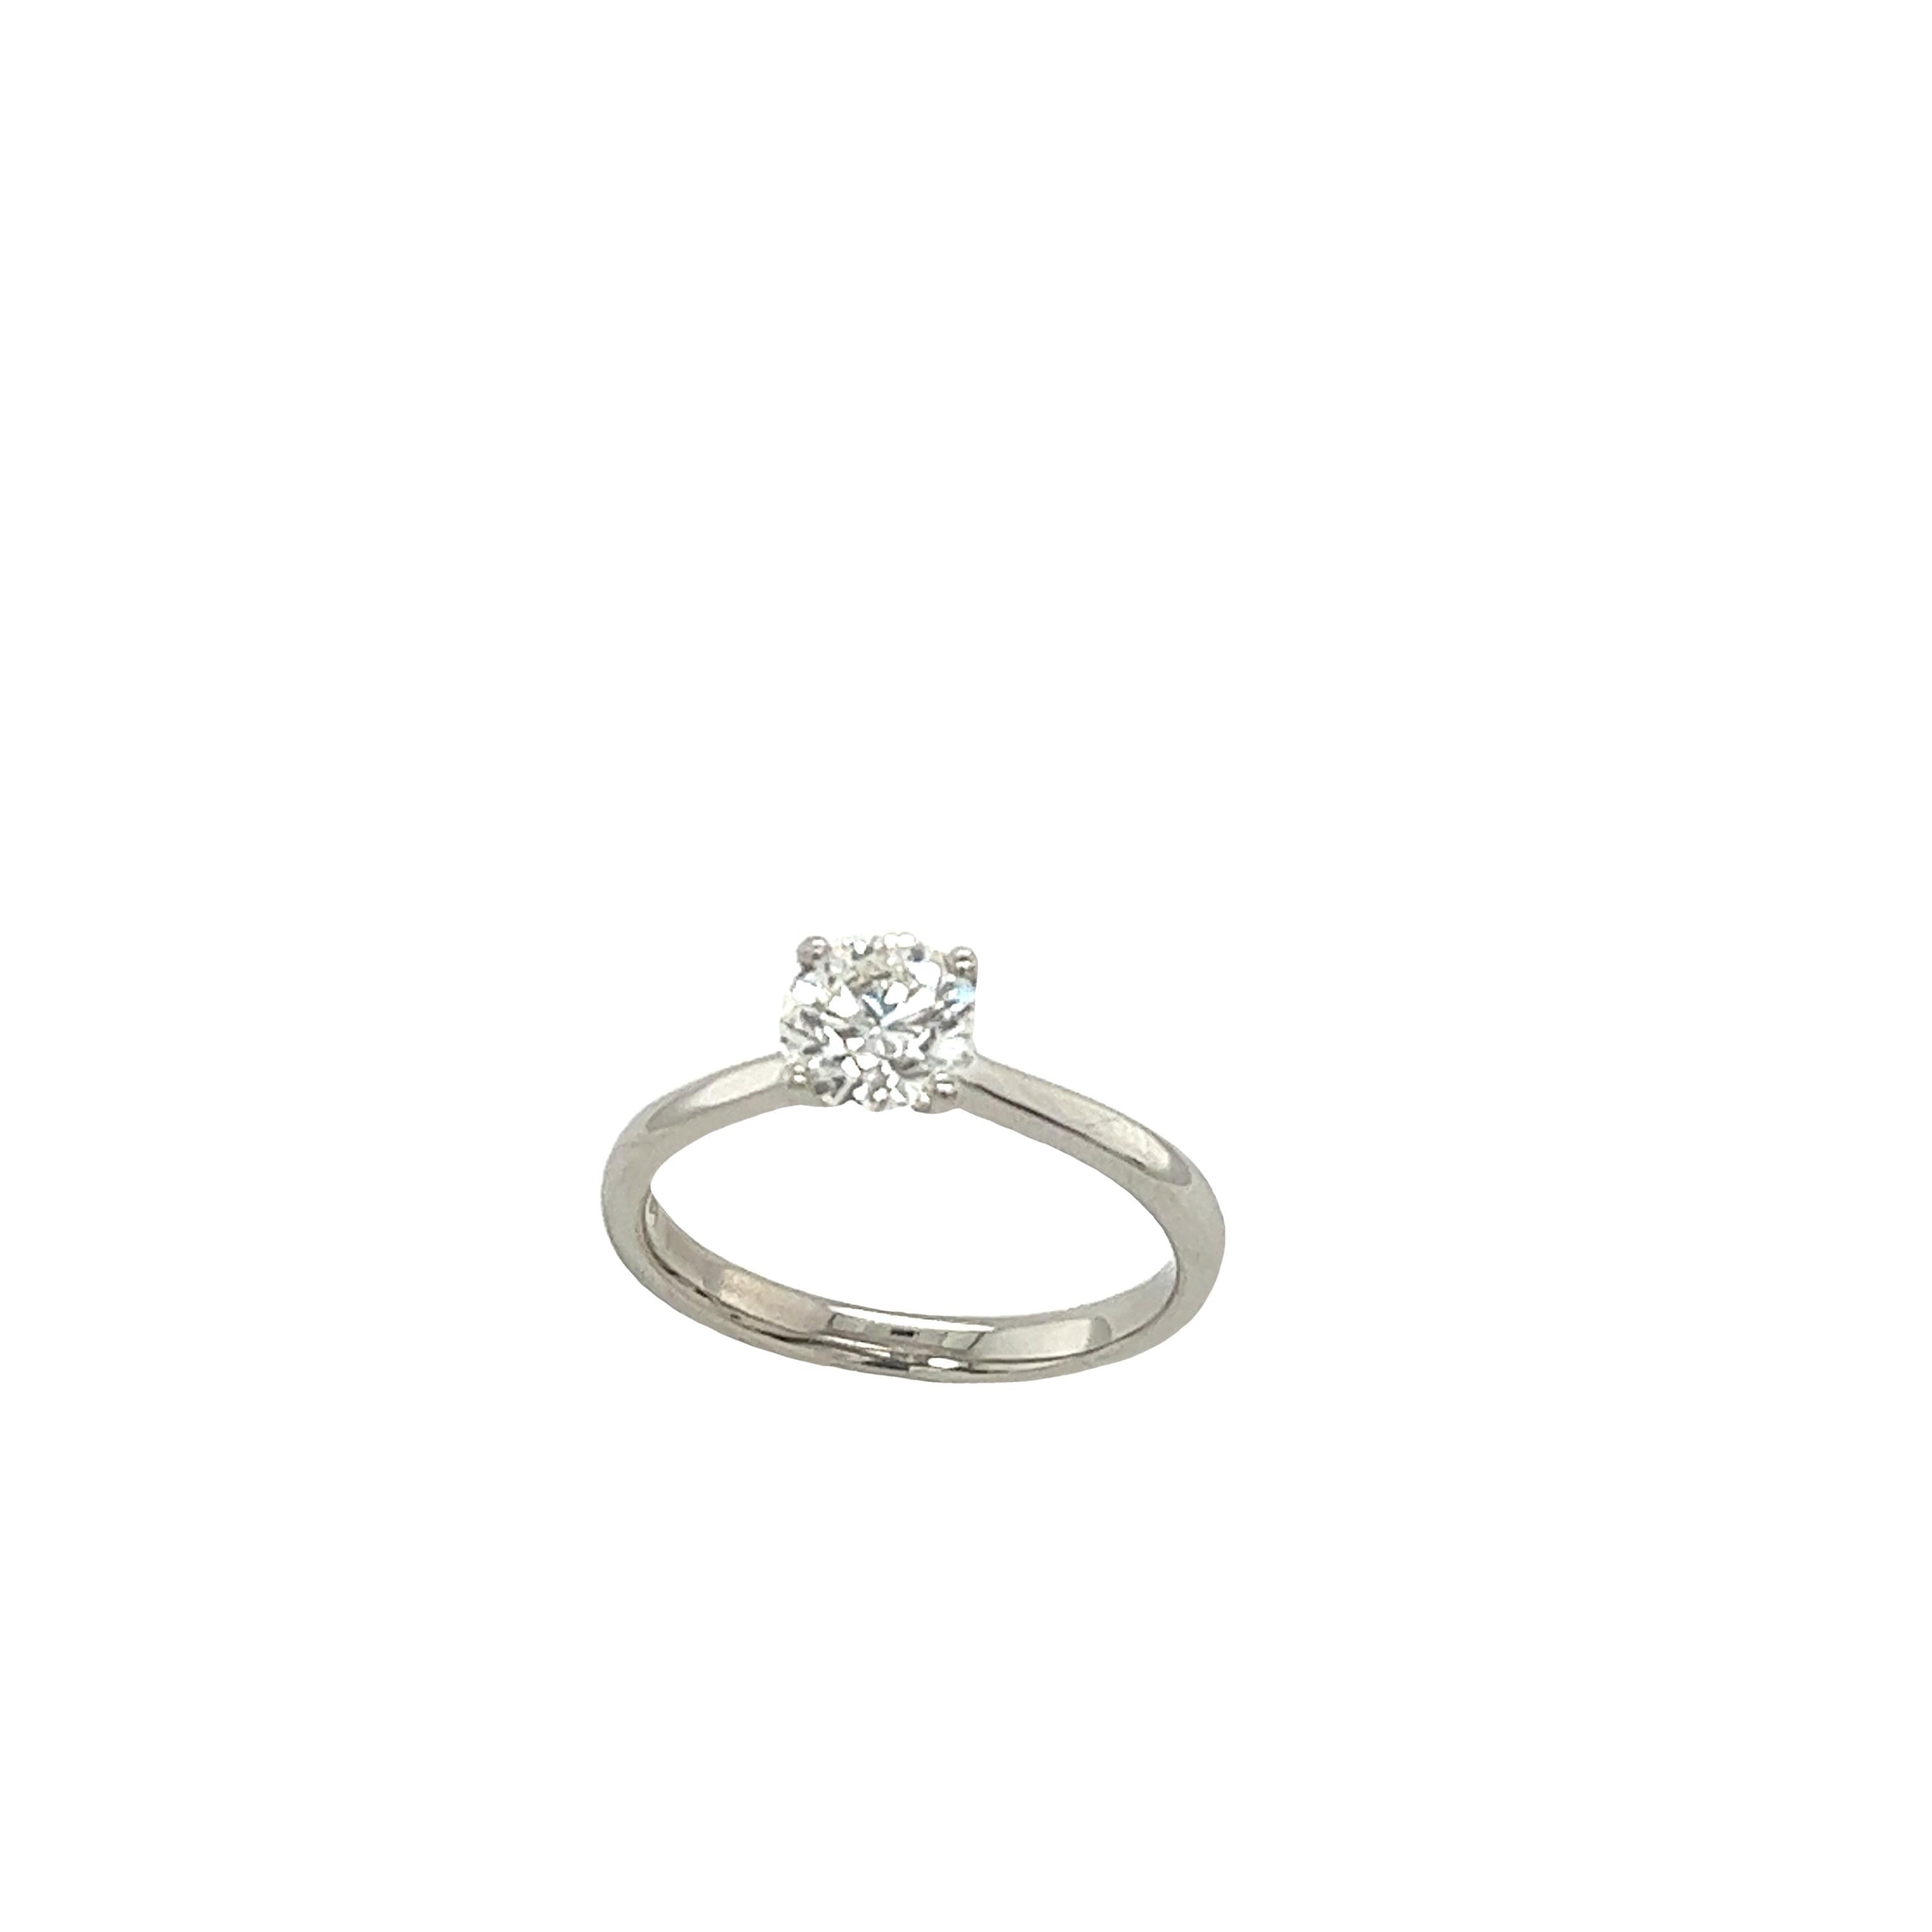 Diamond Solitaire Ring Set With 0.80ct Round Brilliant Cut Diamond For Sale 3